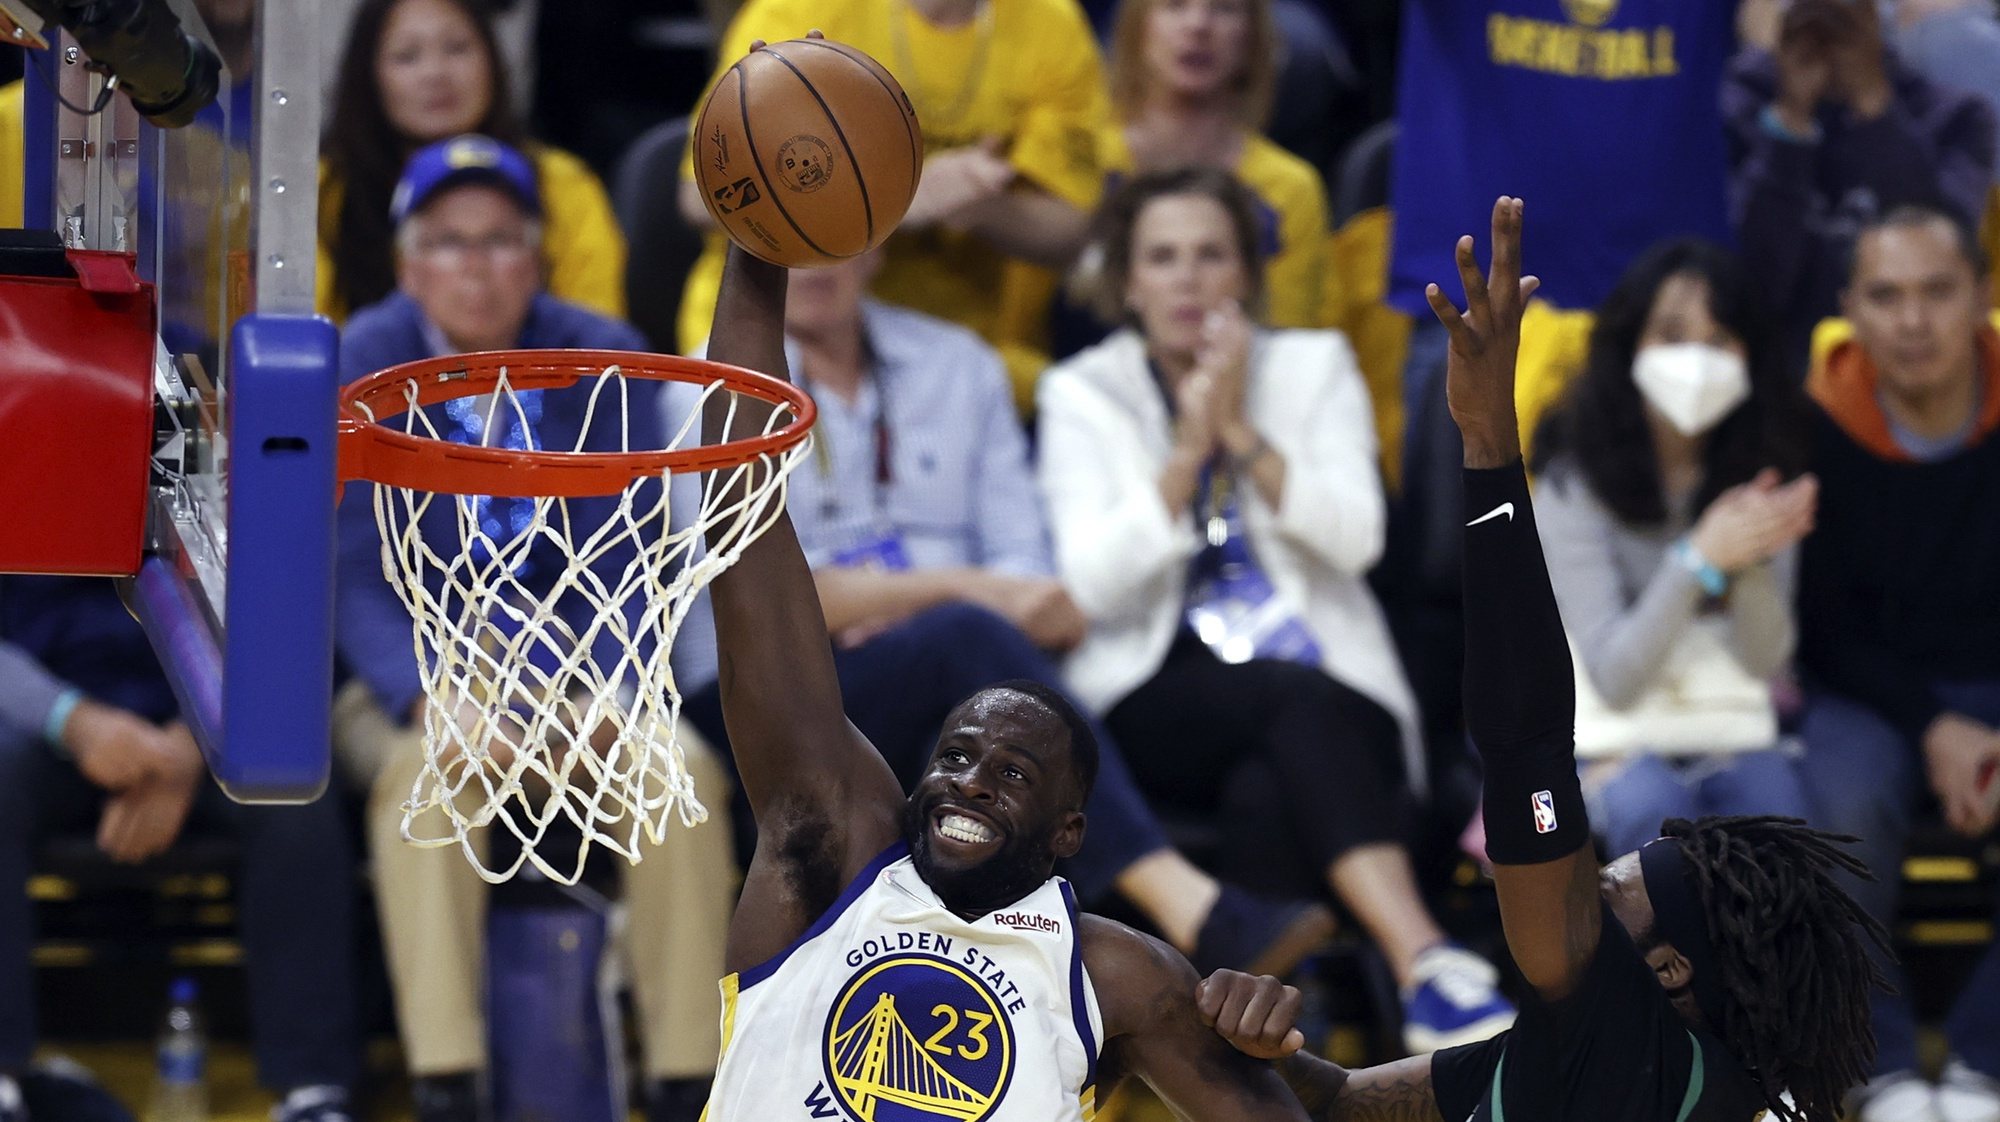 epaselect epa10011846 Golden State Warriors forward Draymond Green (L) prepares to dunk past a defending Boston Celtics center Robert Williams III (R) during the first half of the National Basketball Association (NBA) Finals playoff game five between the Golden State Warriors and the Boston Celtics at the Chase Center in San Francisco, California, USA, 13 June 2022.  EPA/PETER DASILVA SHUTTERSTOCK OUT